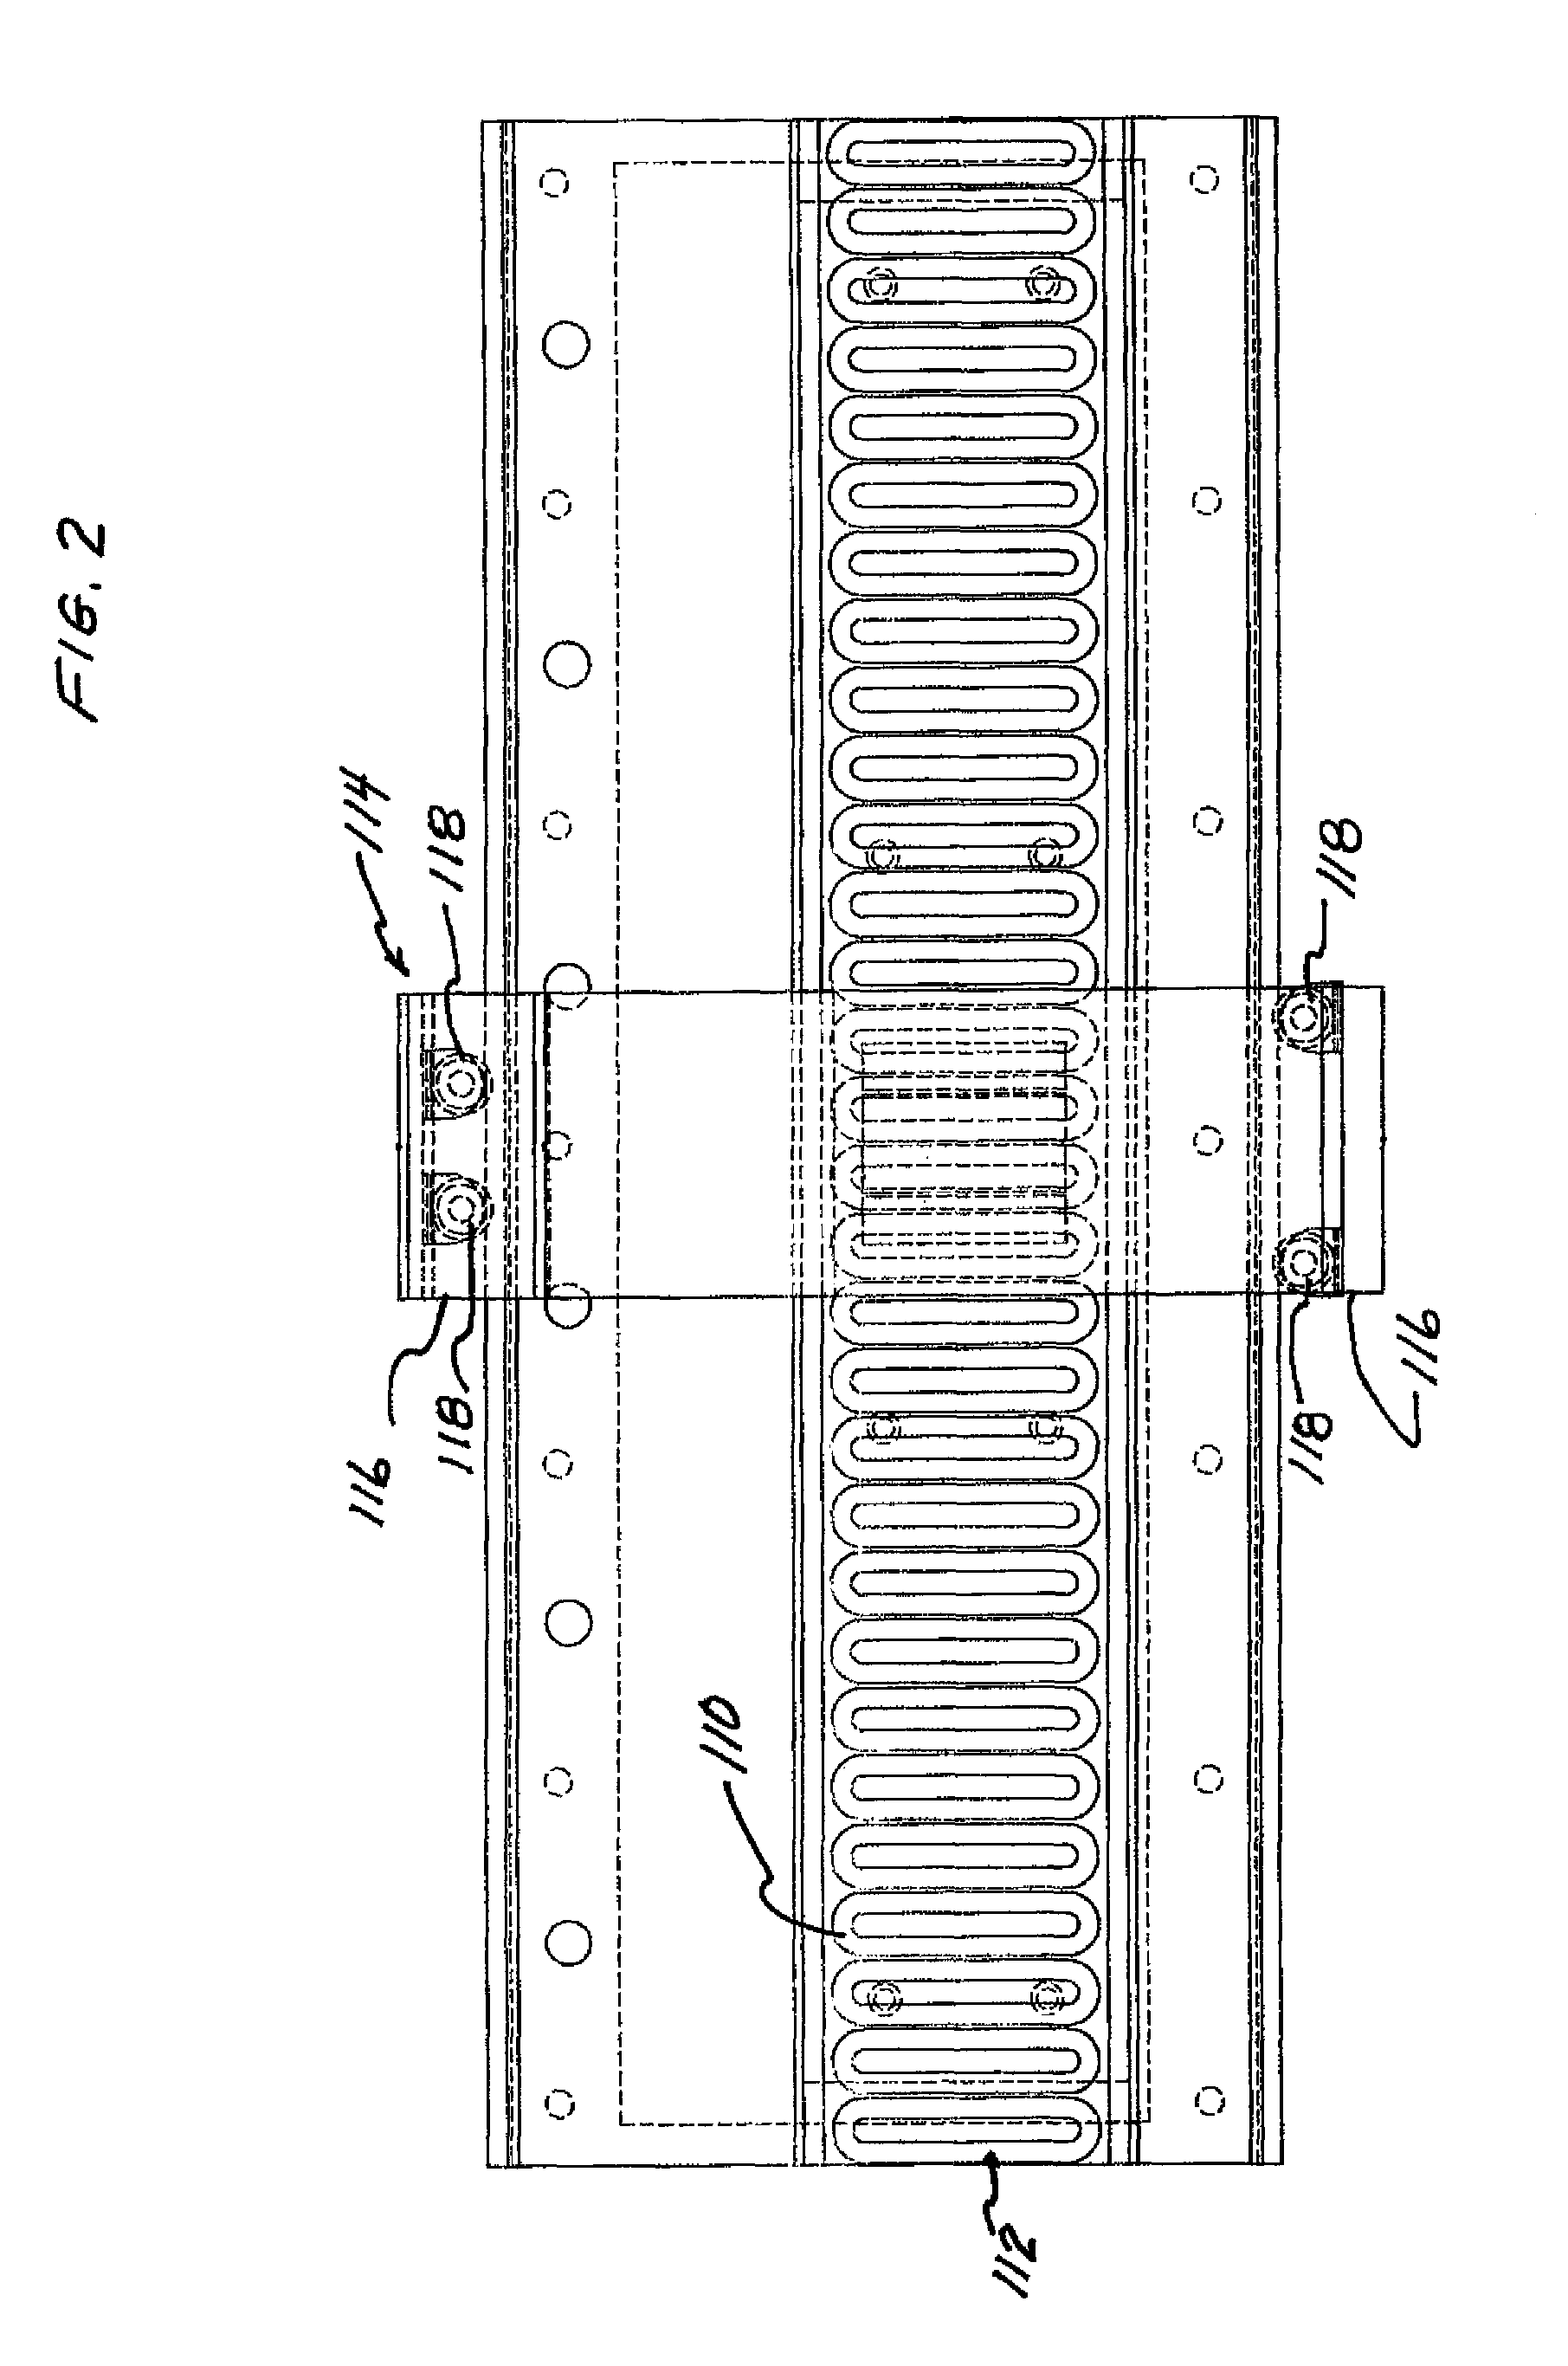 Packaging system and method utilizing intelligent conveyor systems